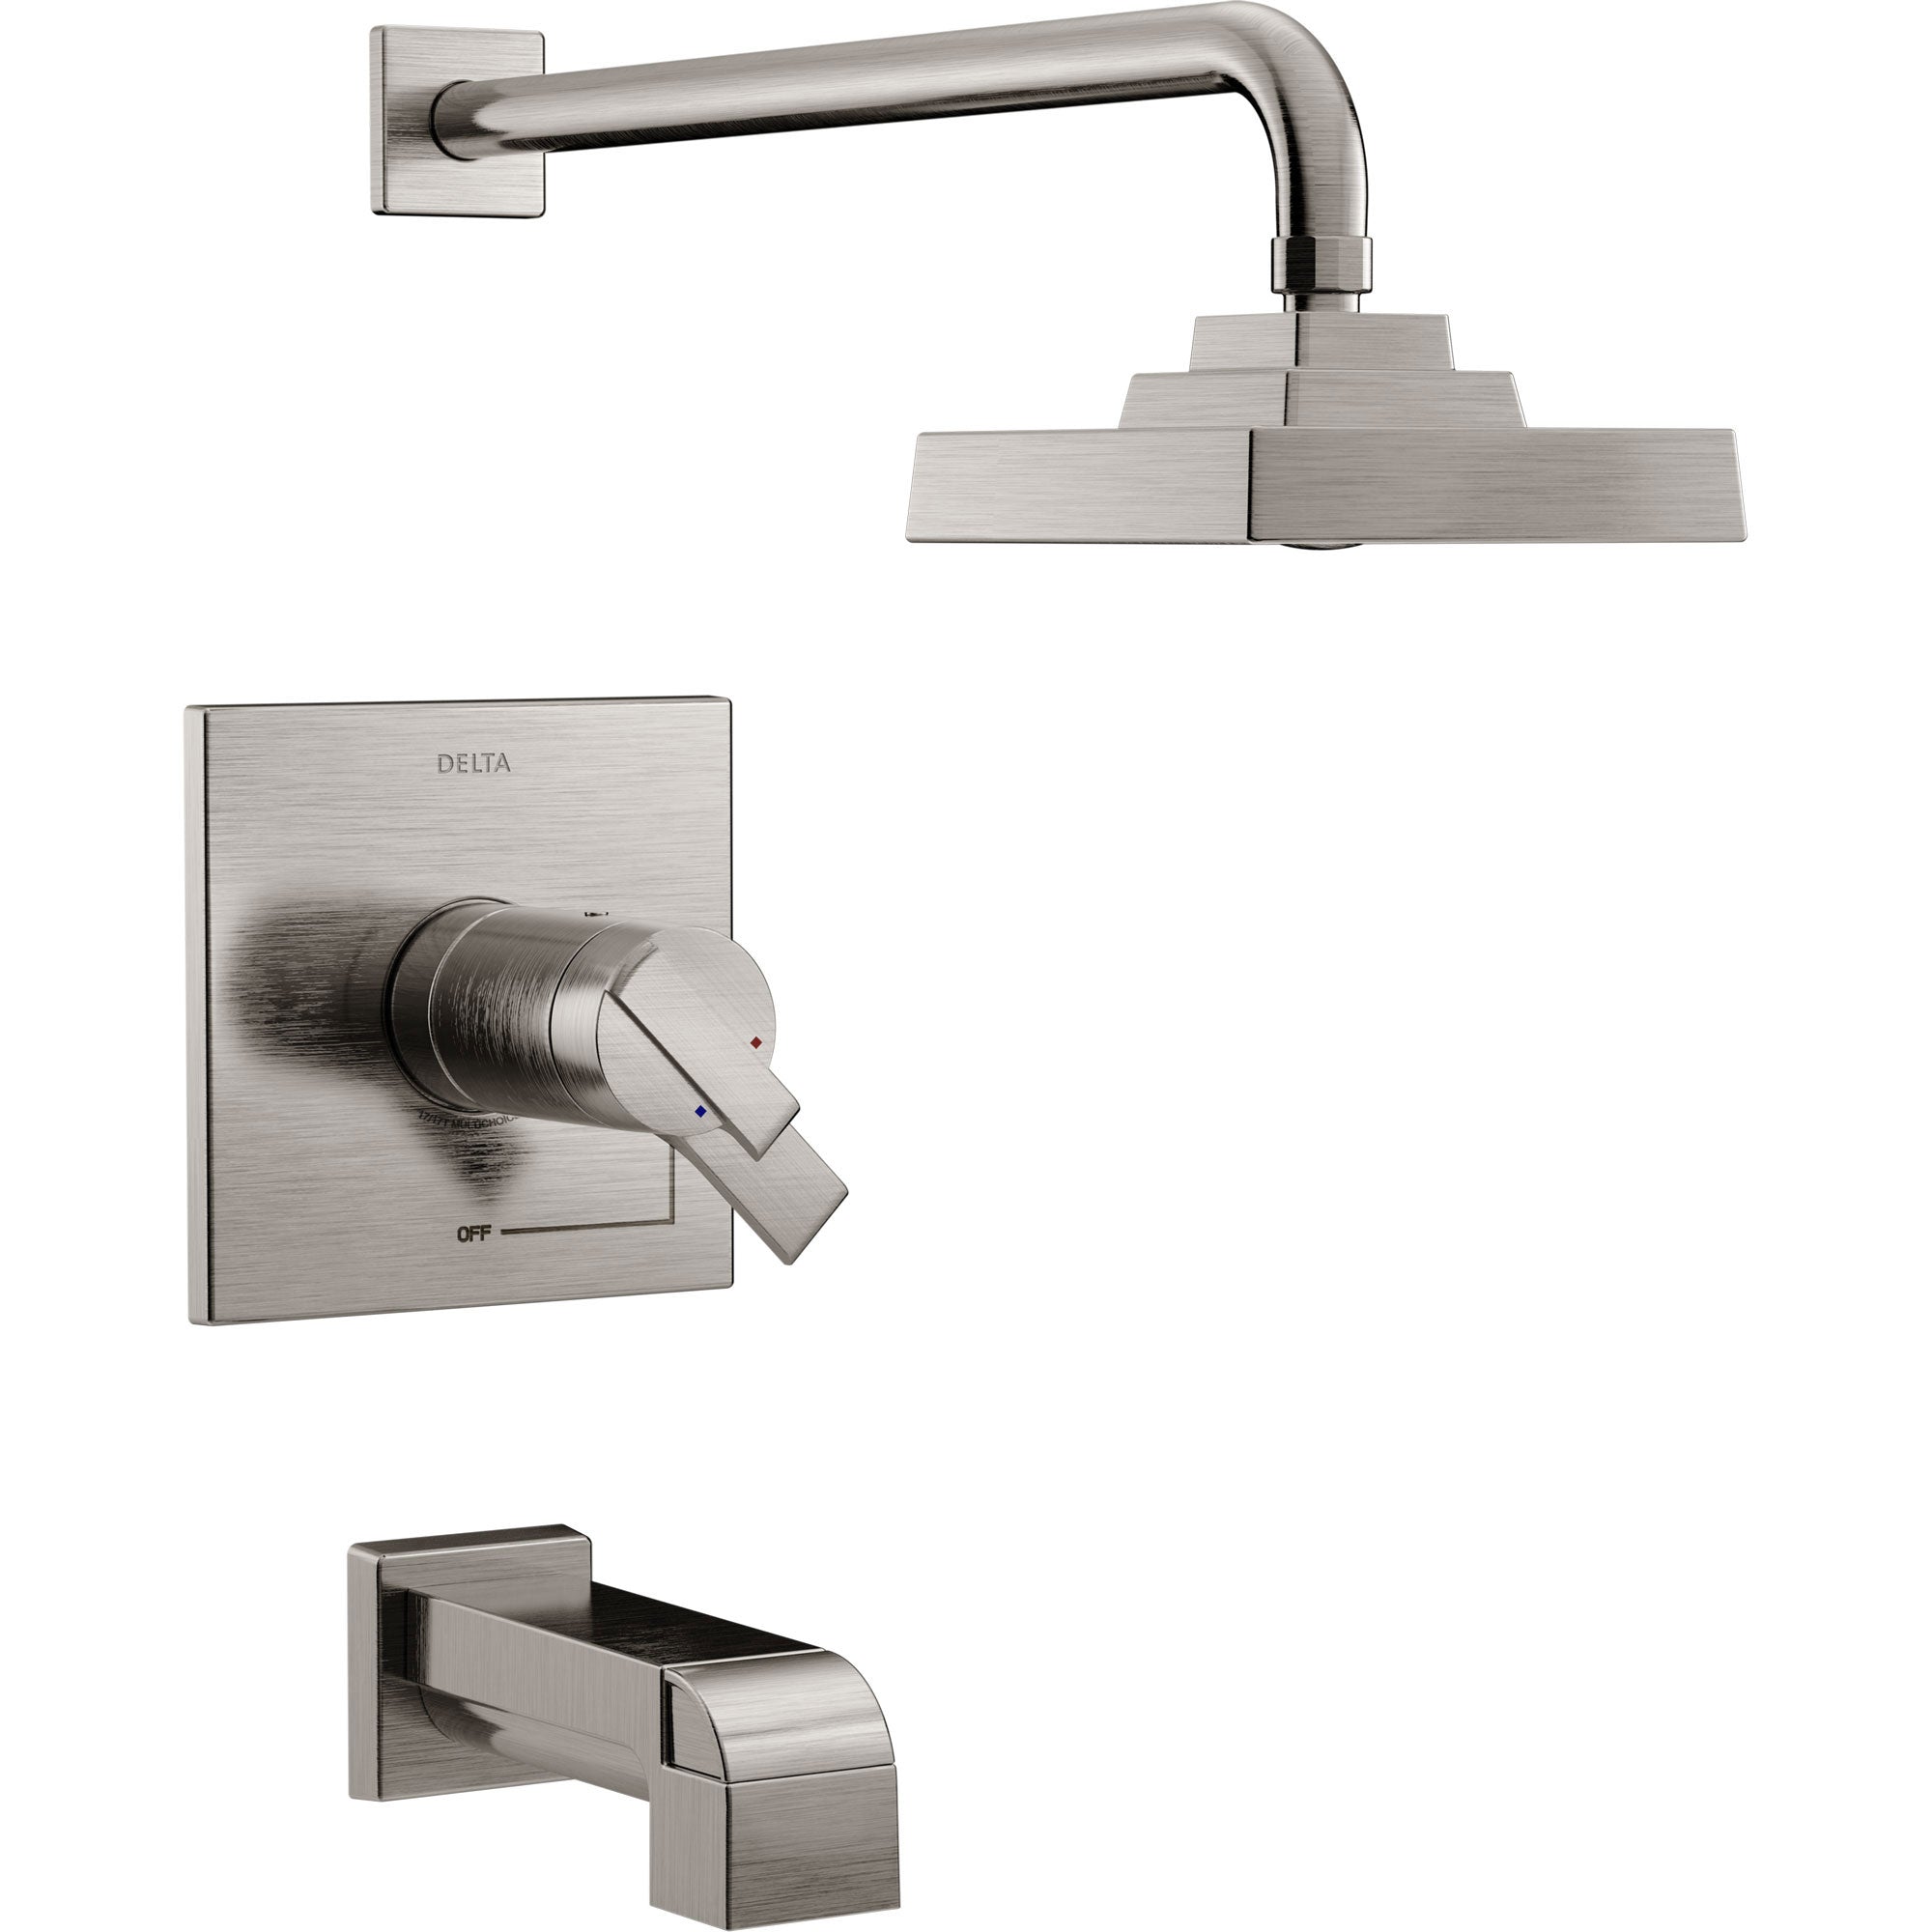 Delta Ara Modern Stainless Steel Finish TempAssure 17T Tub and Shower Combination Faucet with Dual Temperature and Pressure Control INCLUDES Rough-in Valve with Stops D1101V